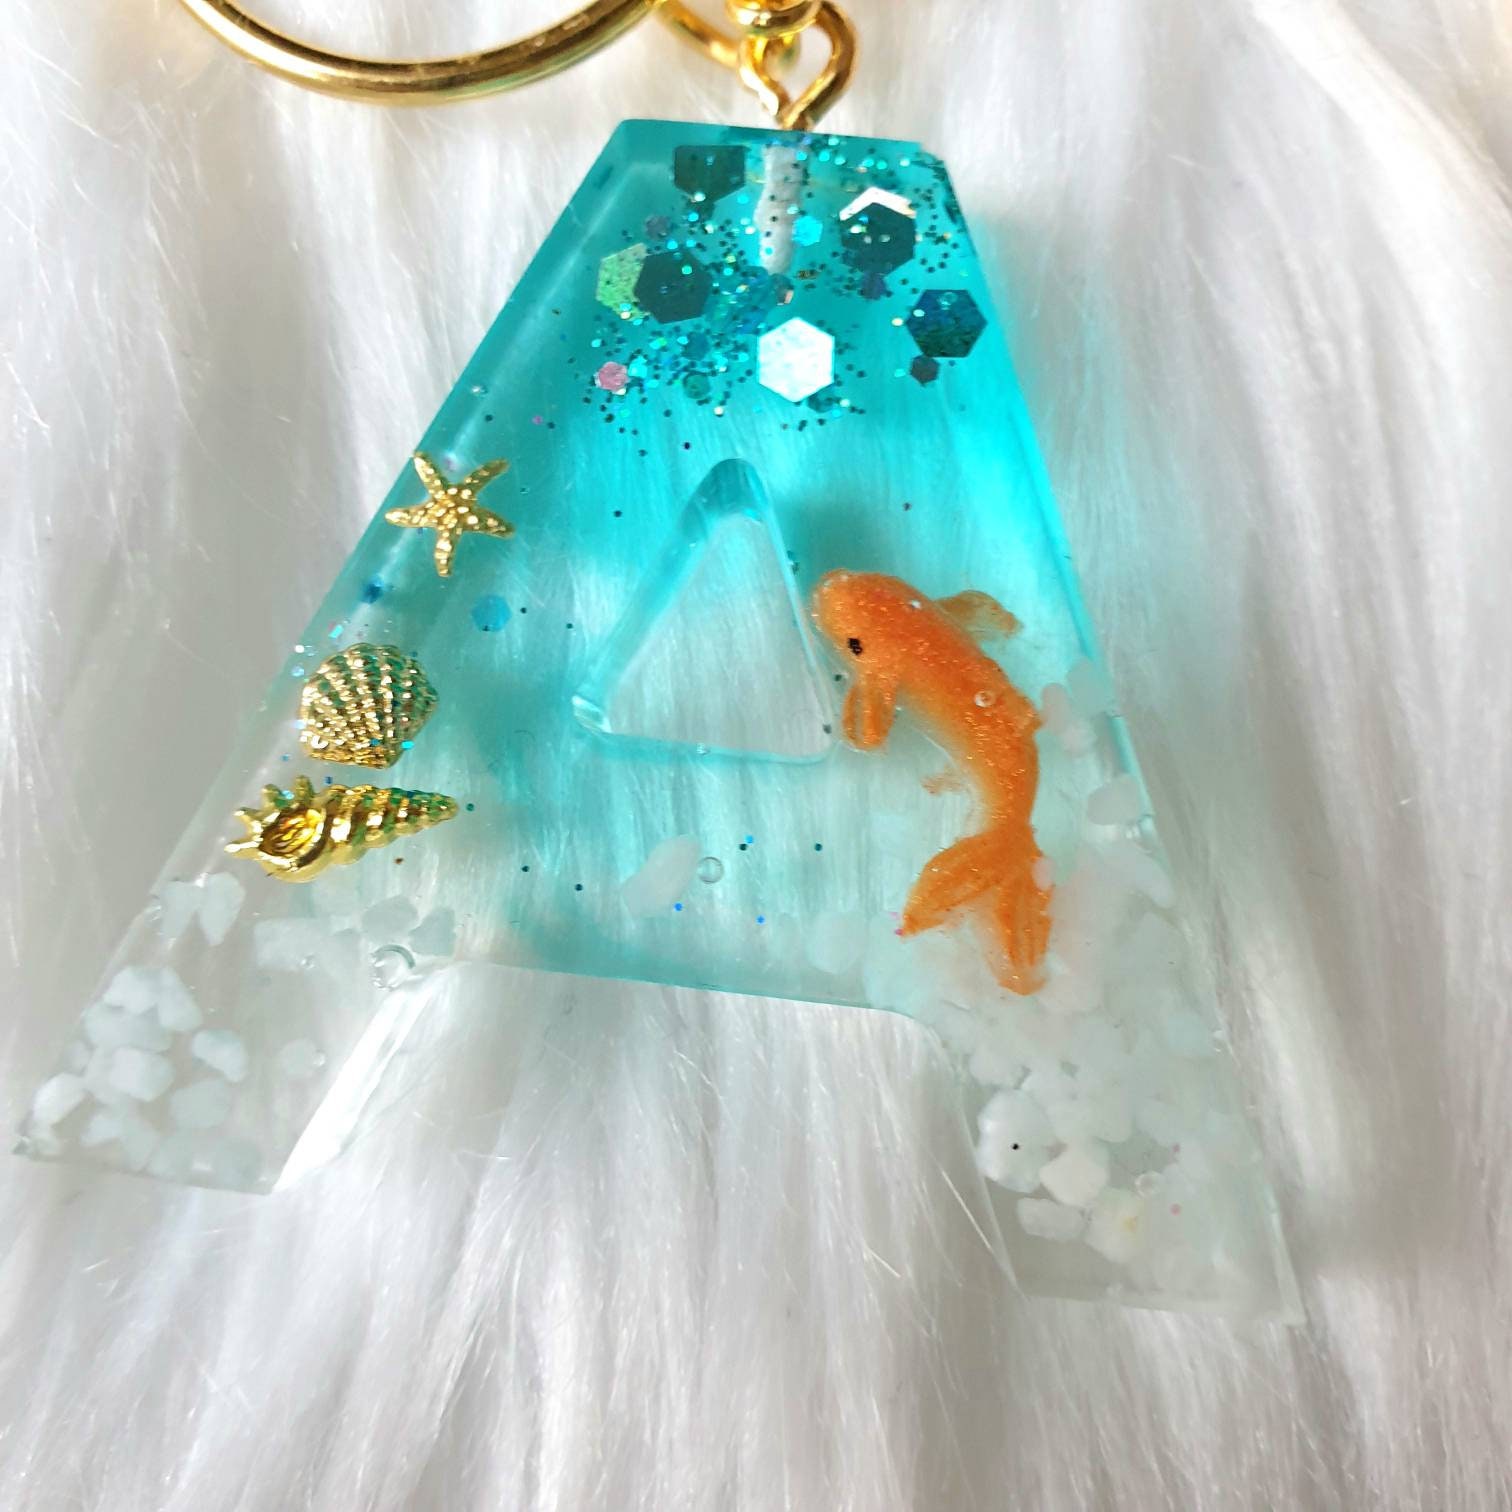 Resin Keychain With Small Underwater World, Letter With Glitter